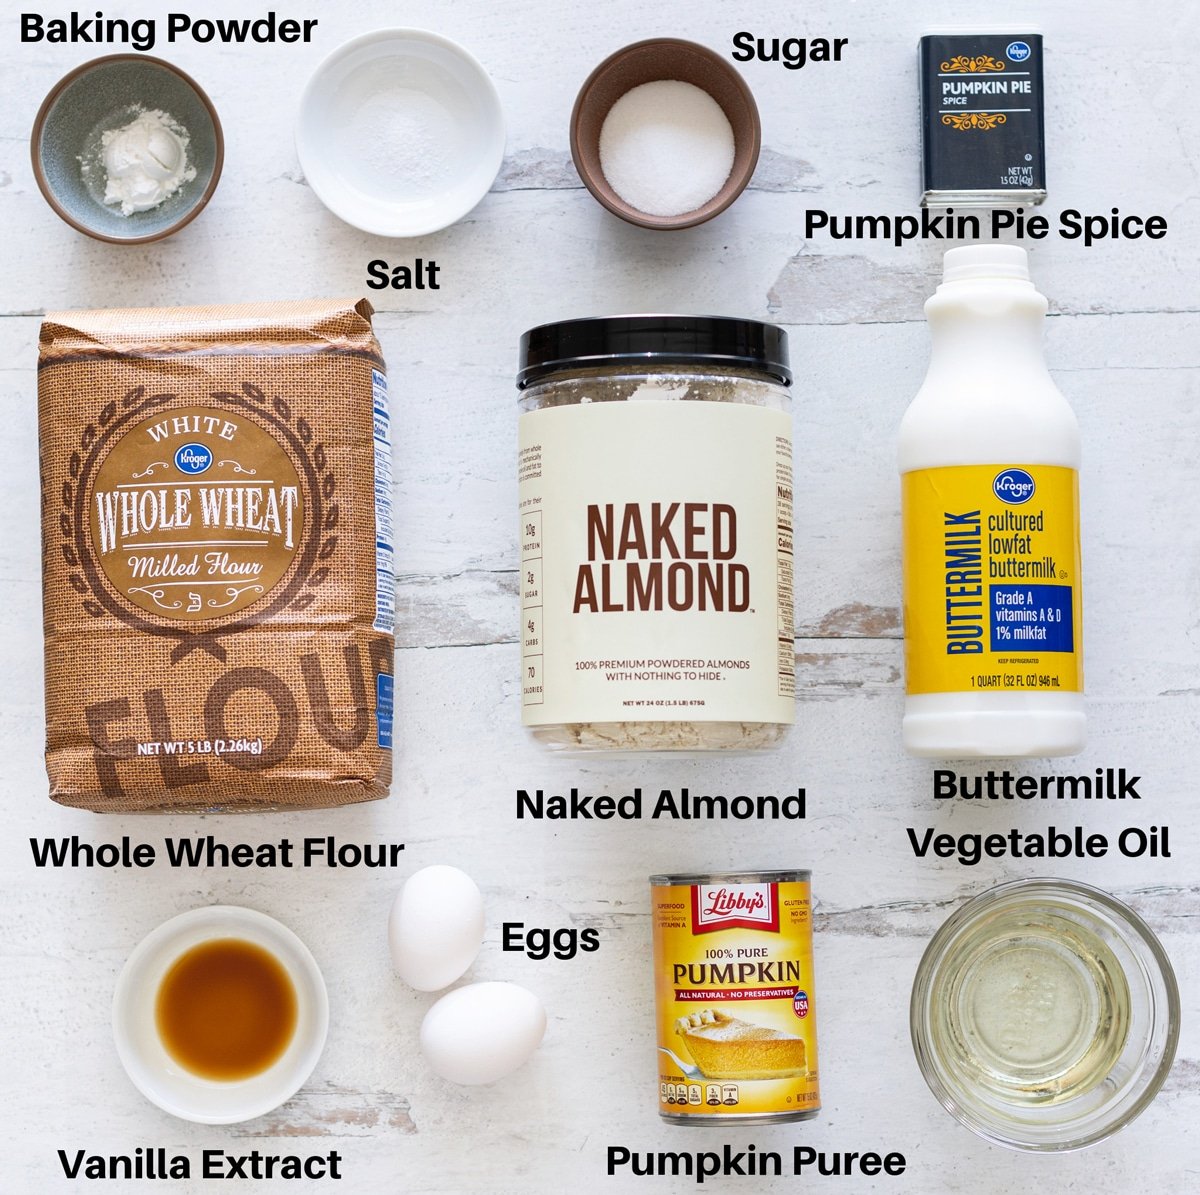 All of the ingredients needed to make pumpkin waffles: Baking powder, salt, sugar, pumpkin pie spice, whole wheat flour, naked almond, buttermilk, eggs, vanilla extract, and vegetable oil. 